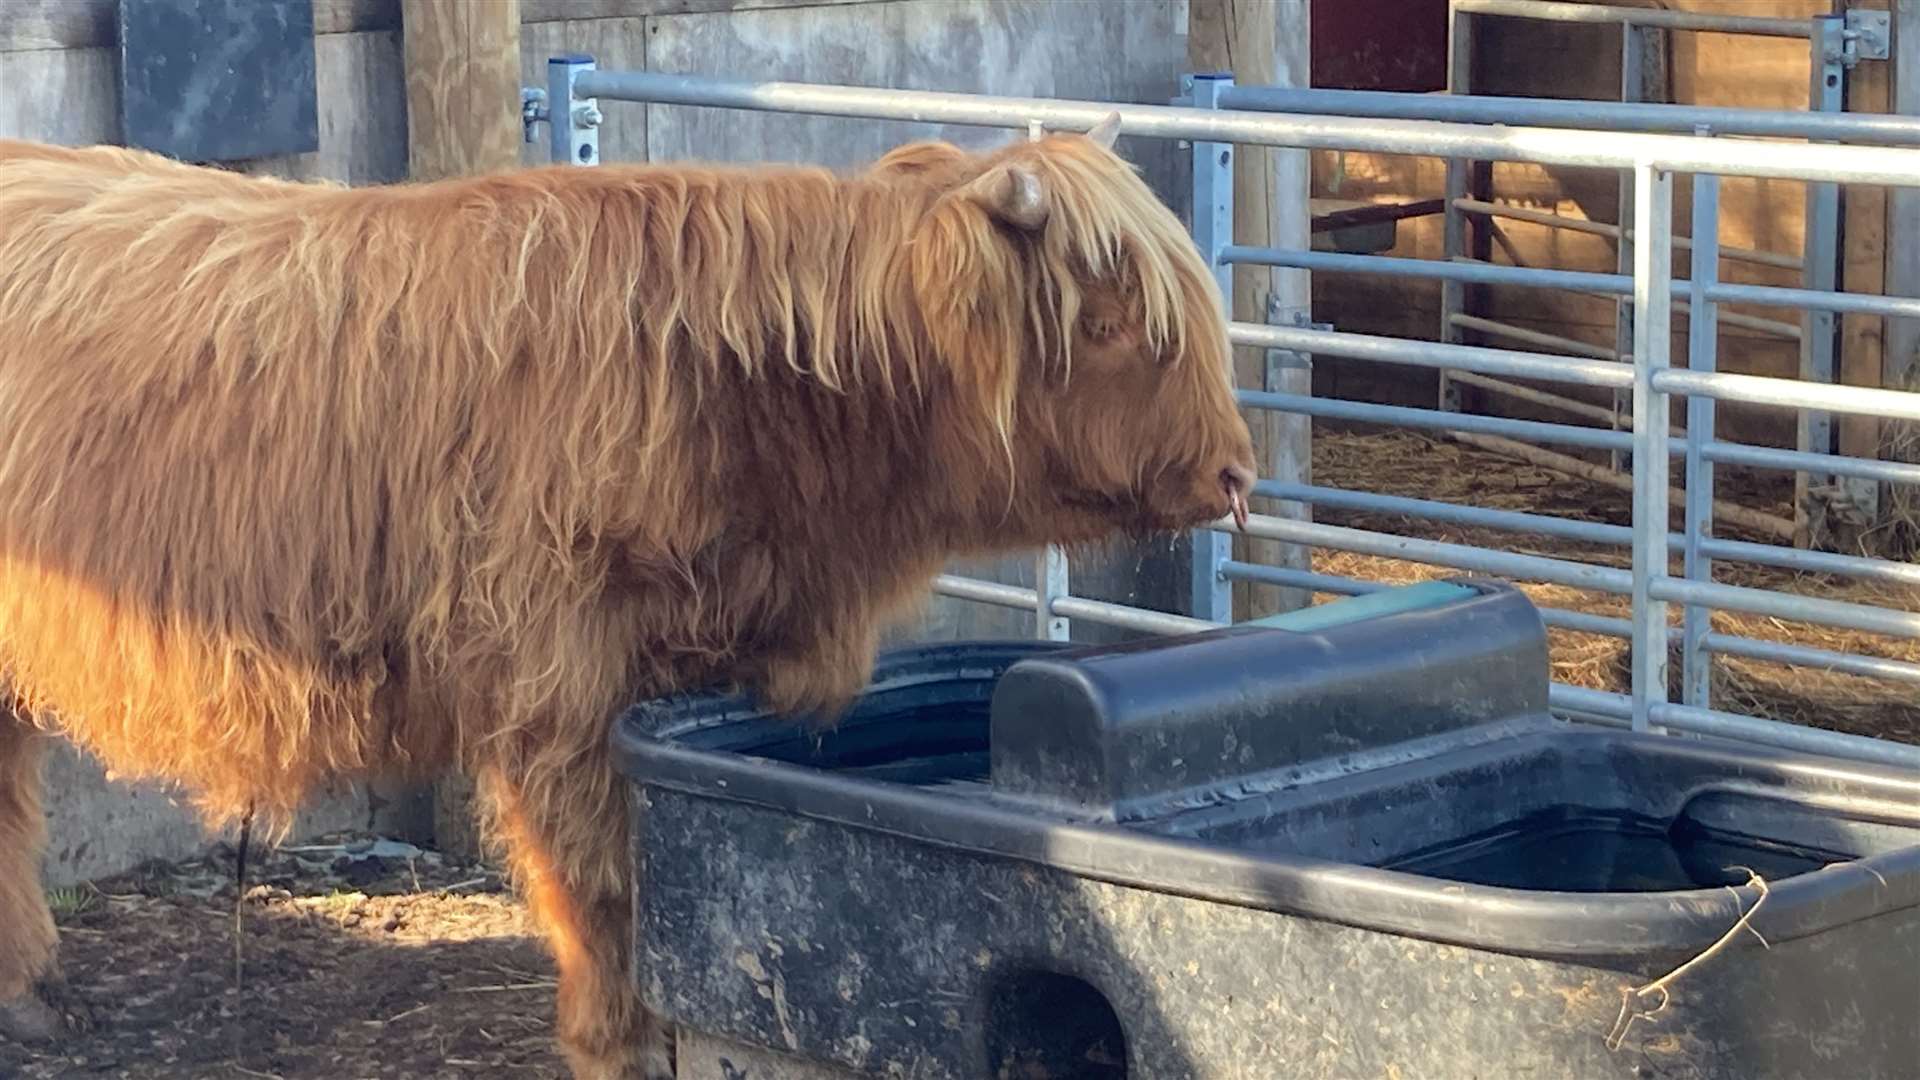 Lumiere the Highland steer at Curly's Farm